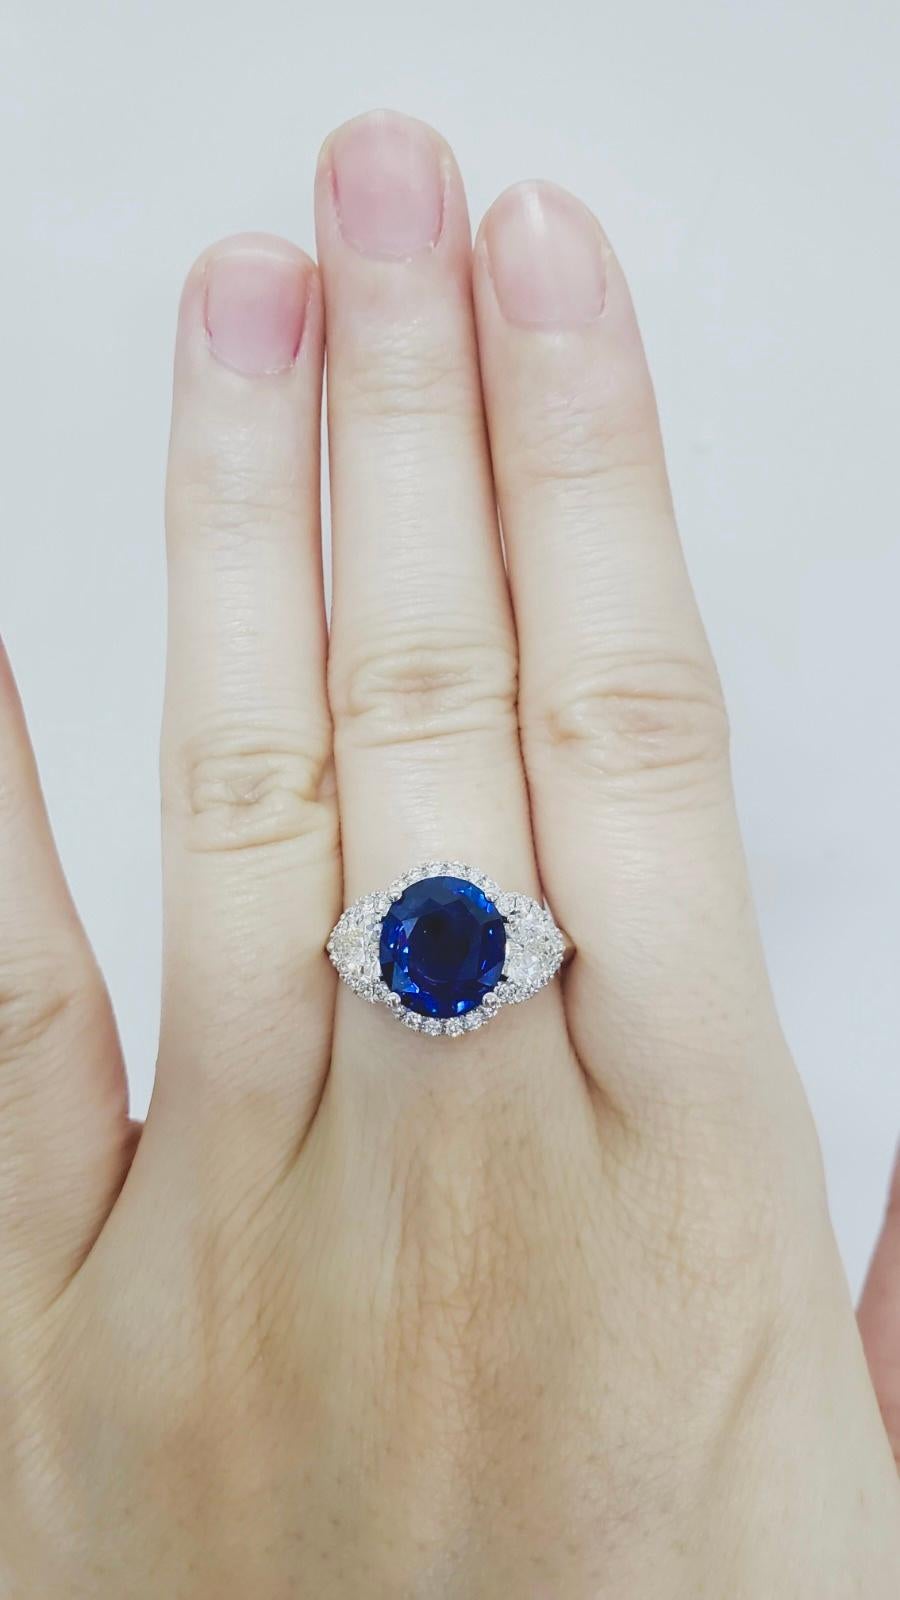 This spectacular ring features a gorgeous 4.02 Sapphire with vivid brilliance and a vibrant color. The Sapphire has a vivid blue (